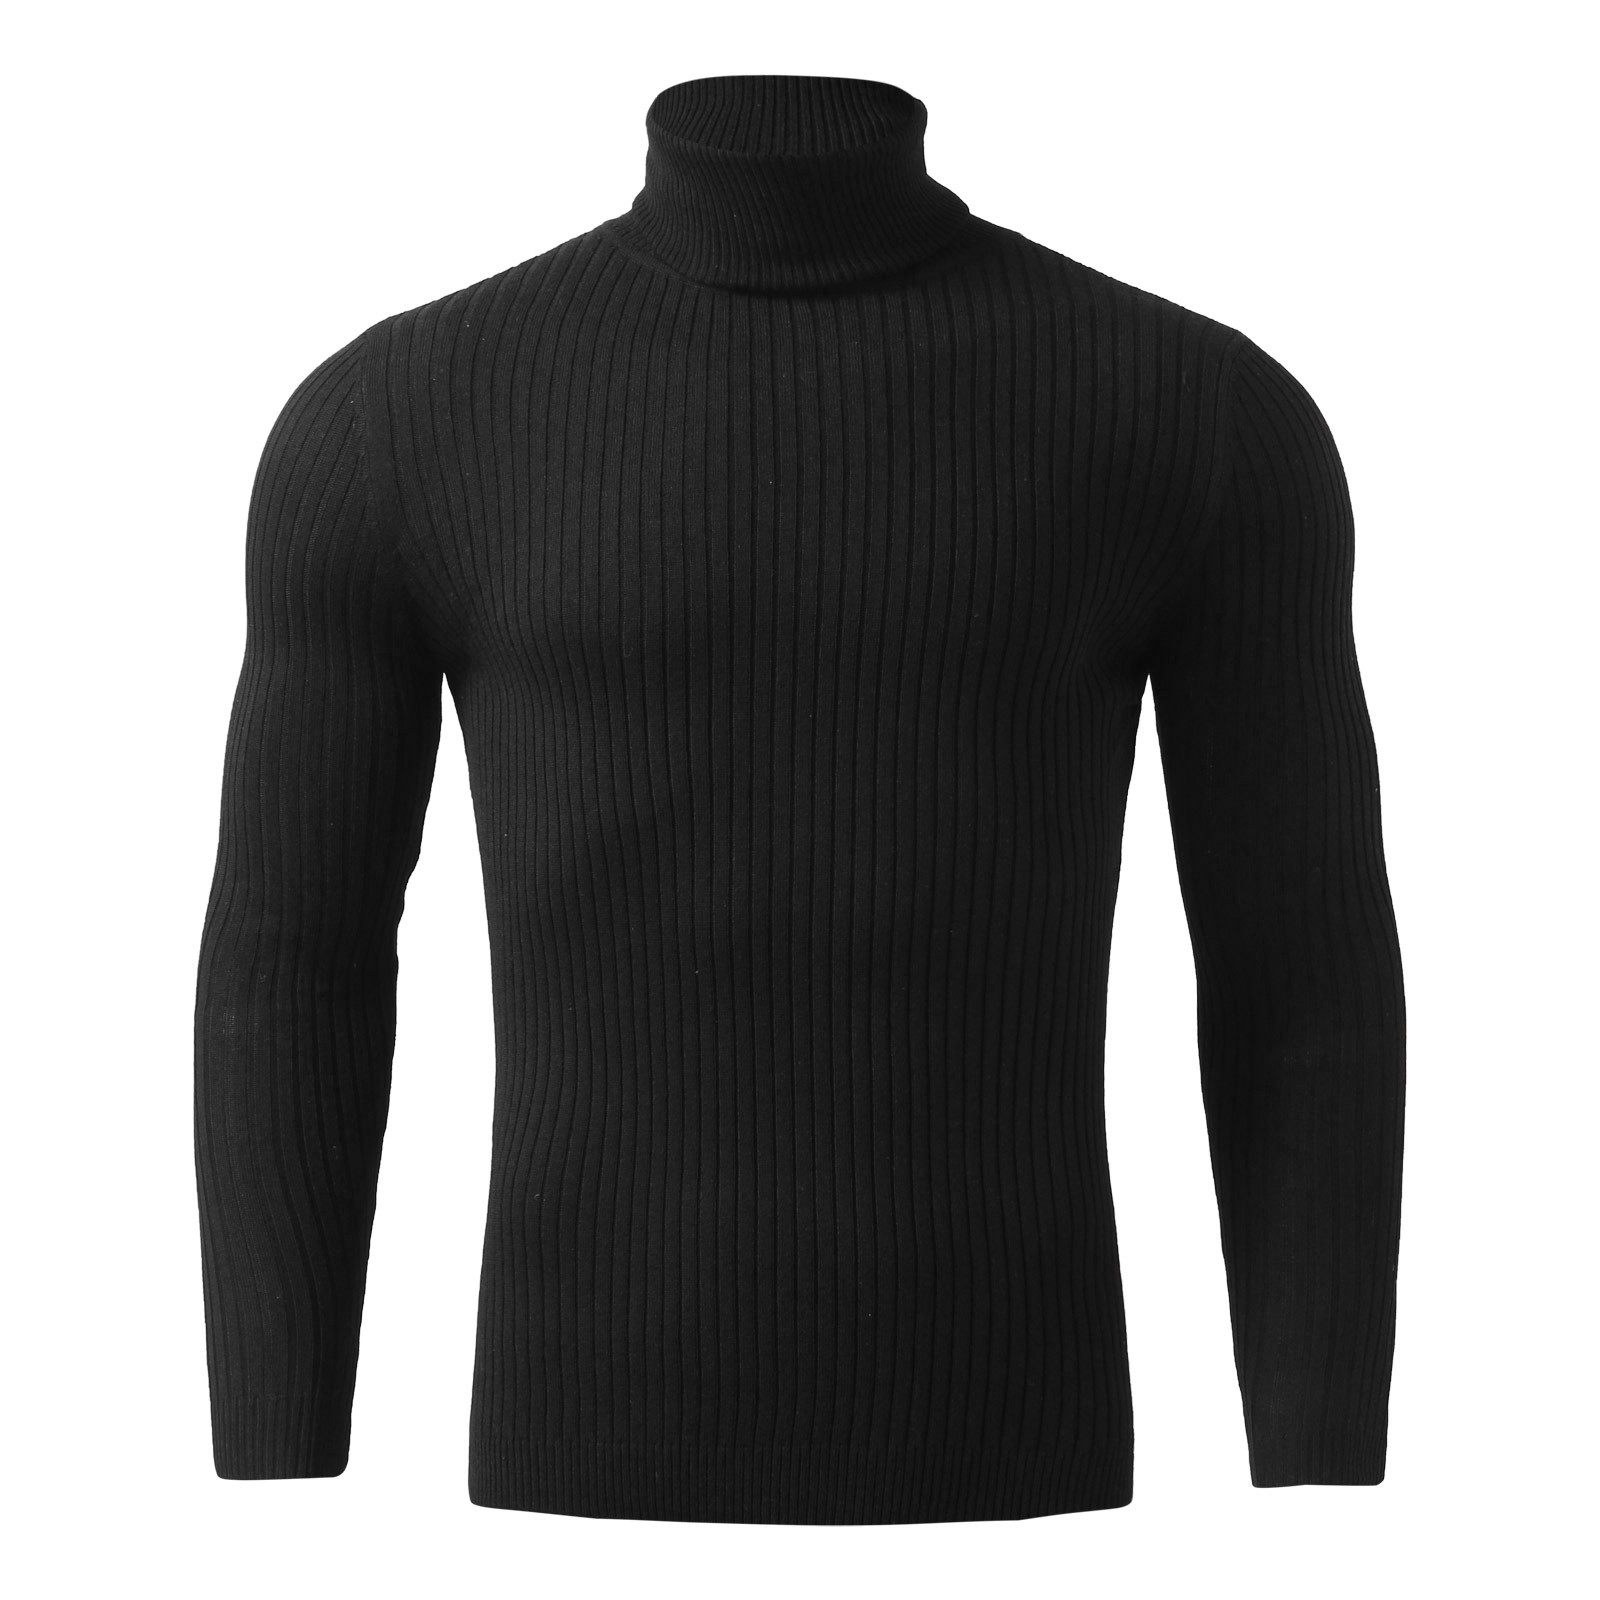 Men's Winter Warm Stand-Up Collar Fashion Thermal Underwear Basic Plain  T-Shirt Blouse Pullover Long Sleeve Top Primark Online Shop, black, S :  : Fashion